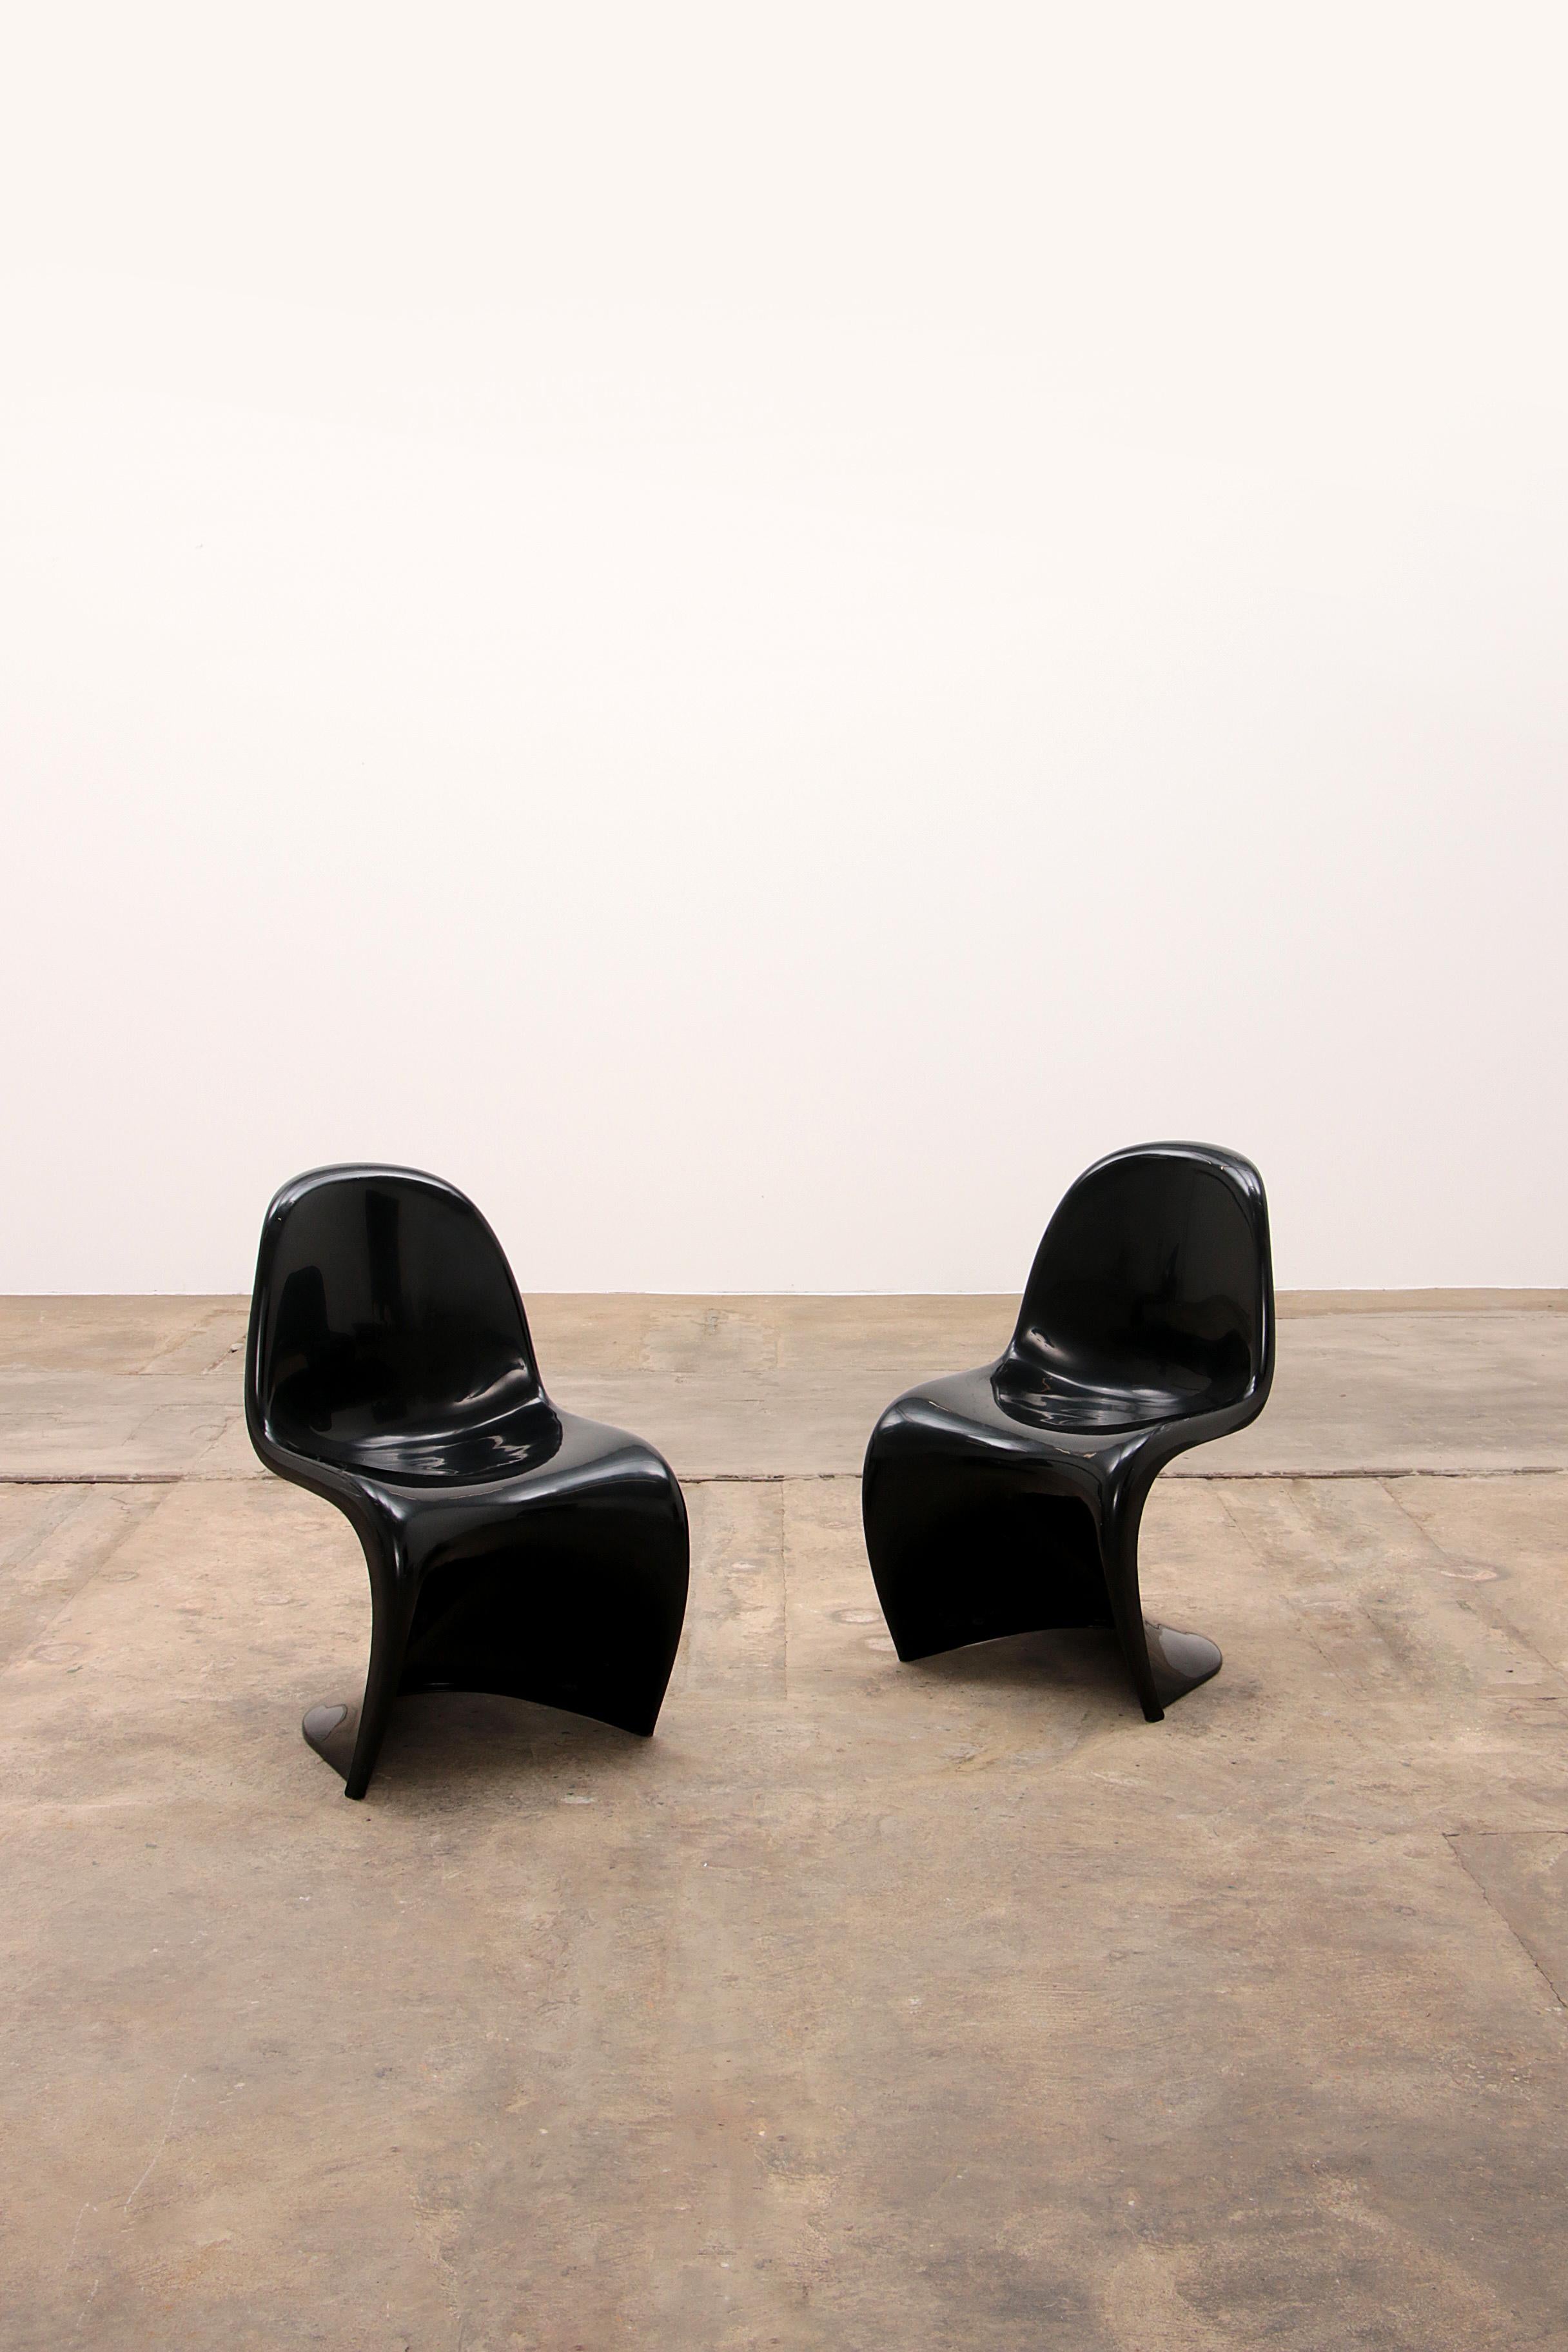 Set of 2 black chairs, original Verner Panton Vitra design classics.
The Panton Chair is a true design classic from the 1960s.

designer: Verner Panton
manufacturer: Herman Miller
Year of construction: 1971 - 1976 (This set) completely original